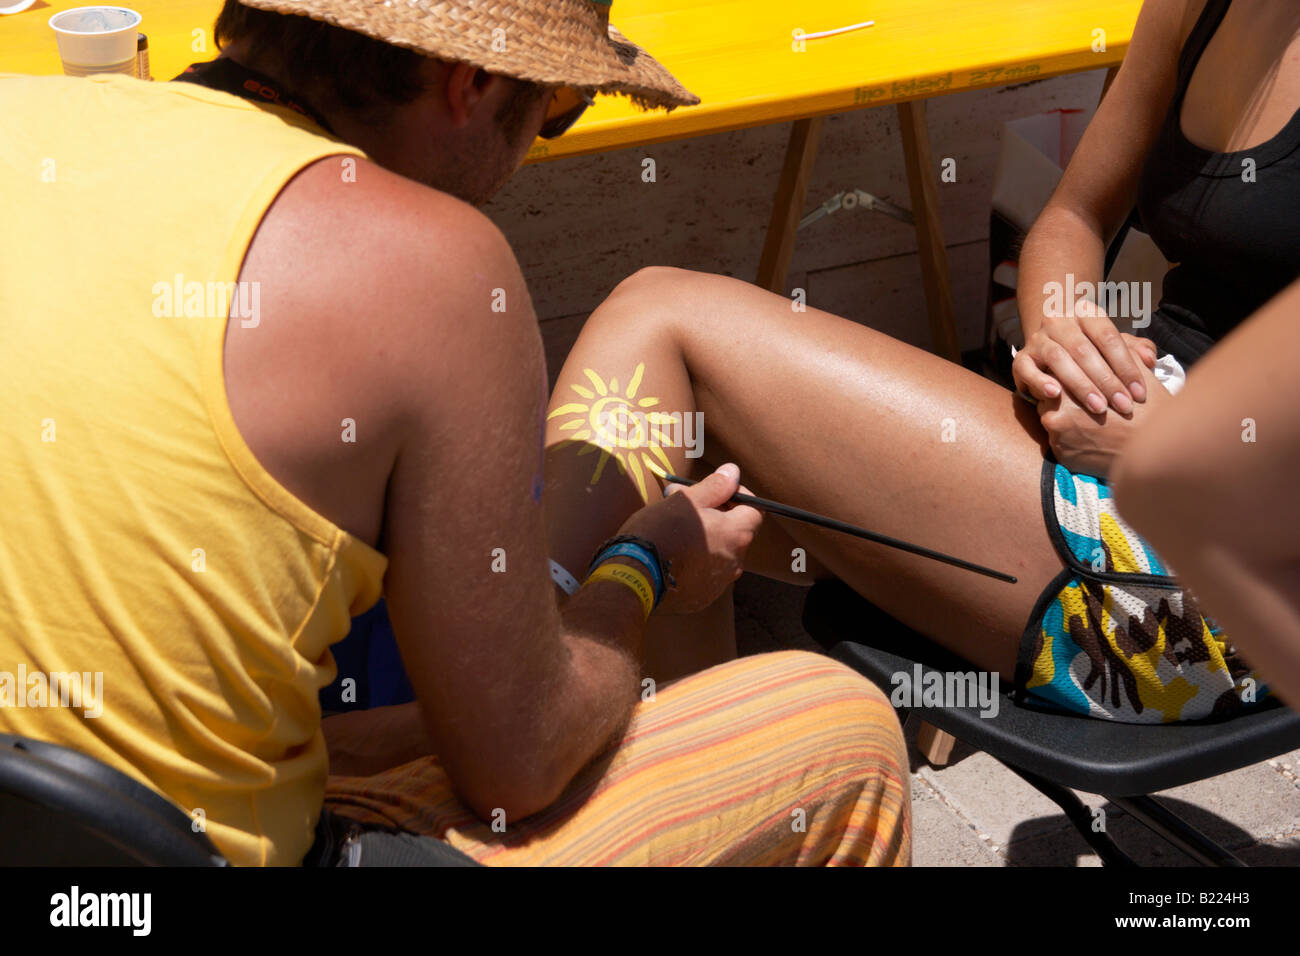 Body painting at Eolica festival on Tenerife in The Canary Islands. Stock Photo